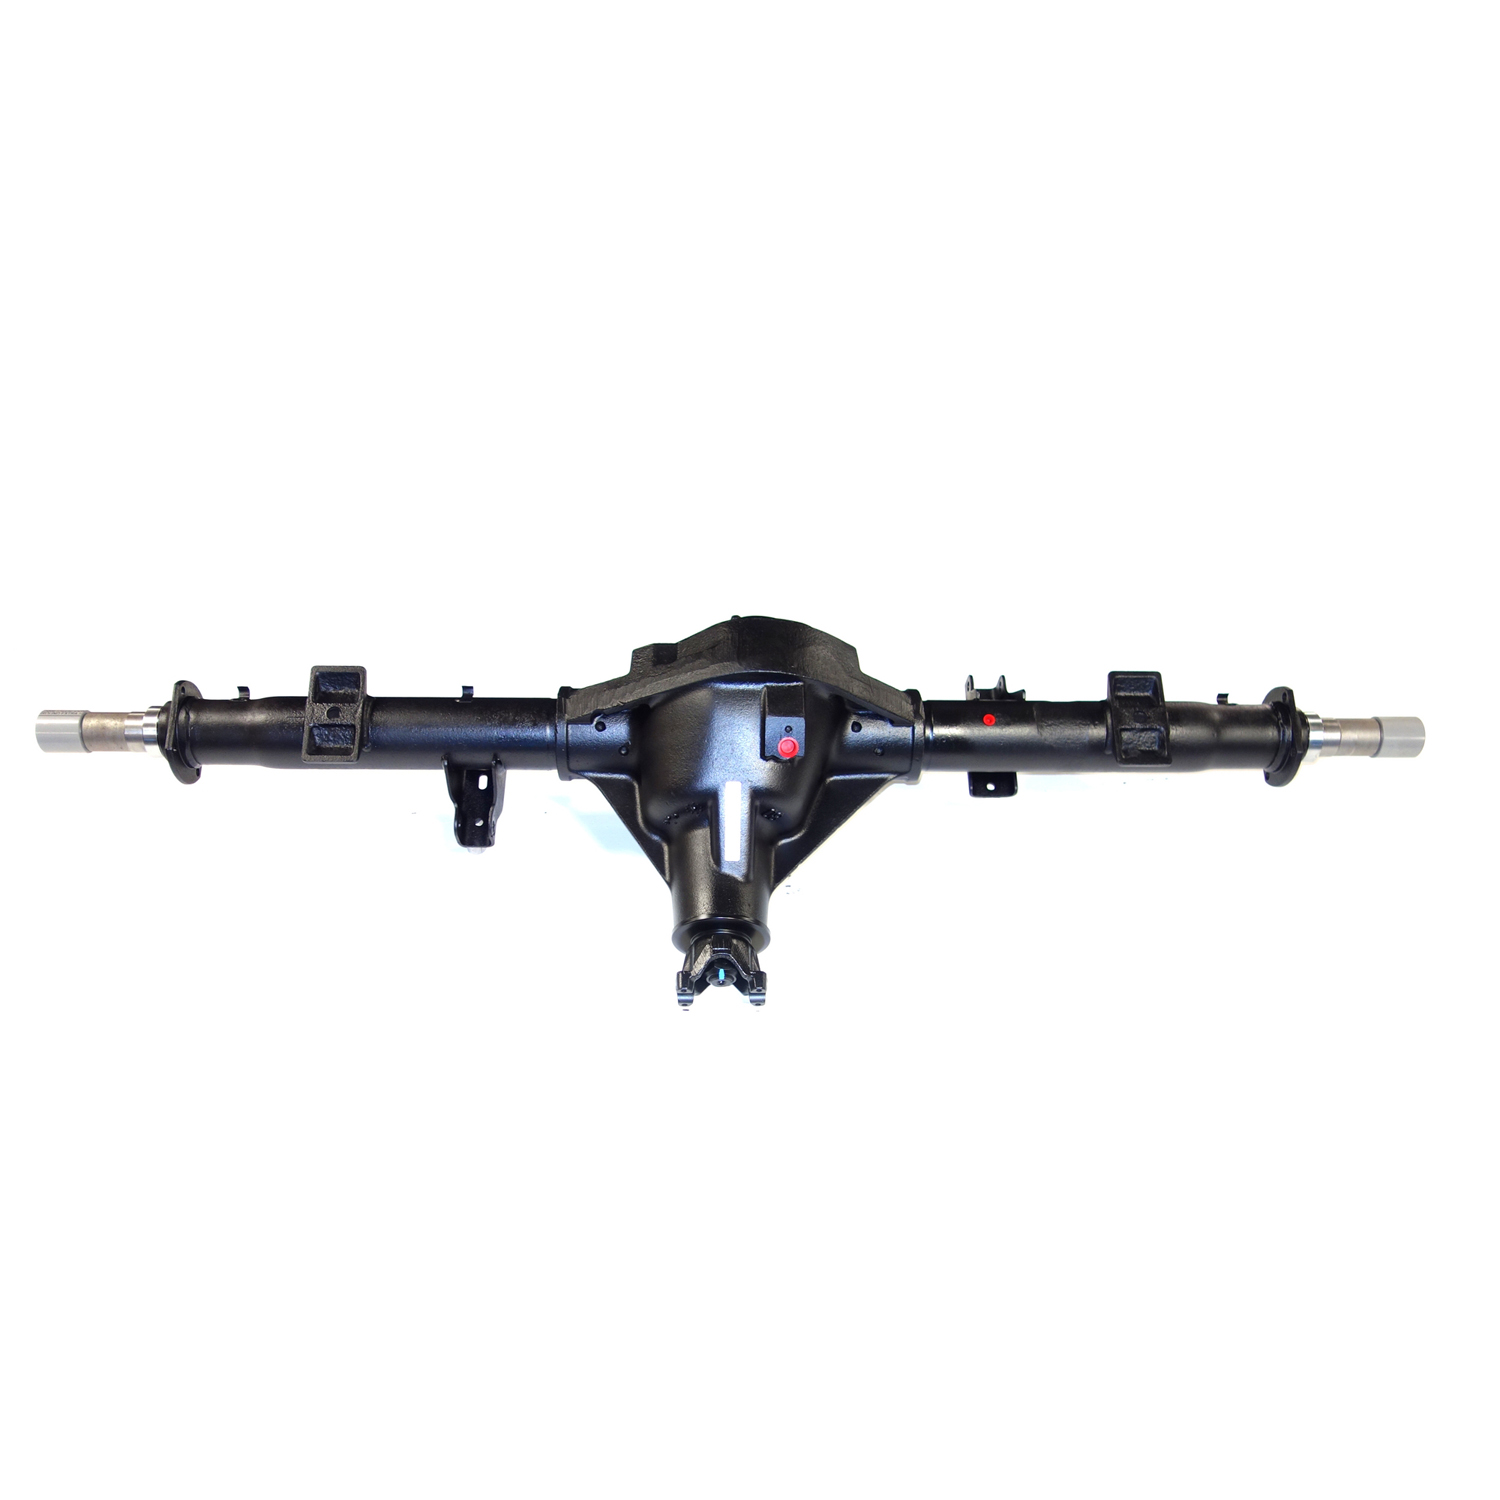 Remanufactured Axle Assy for Dana 80 94-99 Ram 2500 4.11 w/ Staggered Shocks, Posi LSD